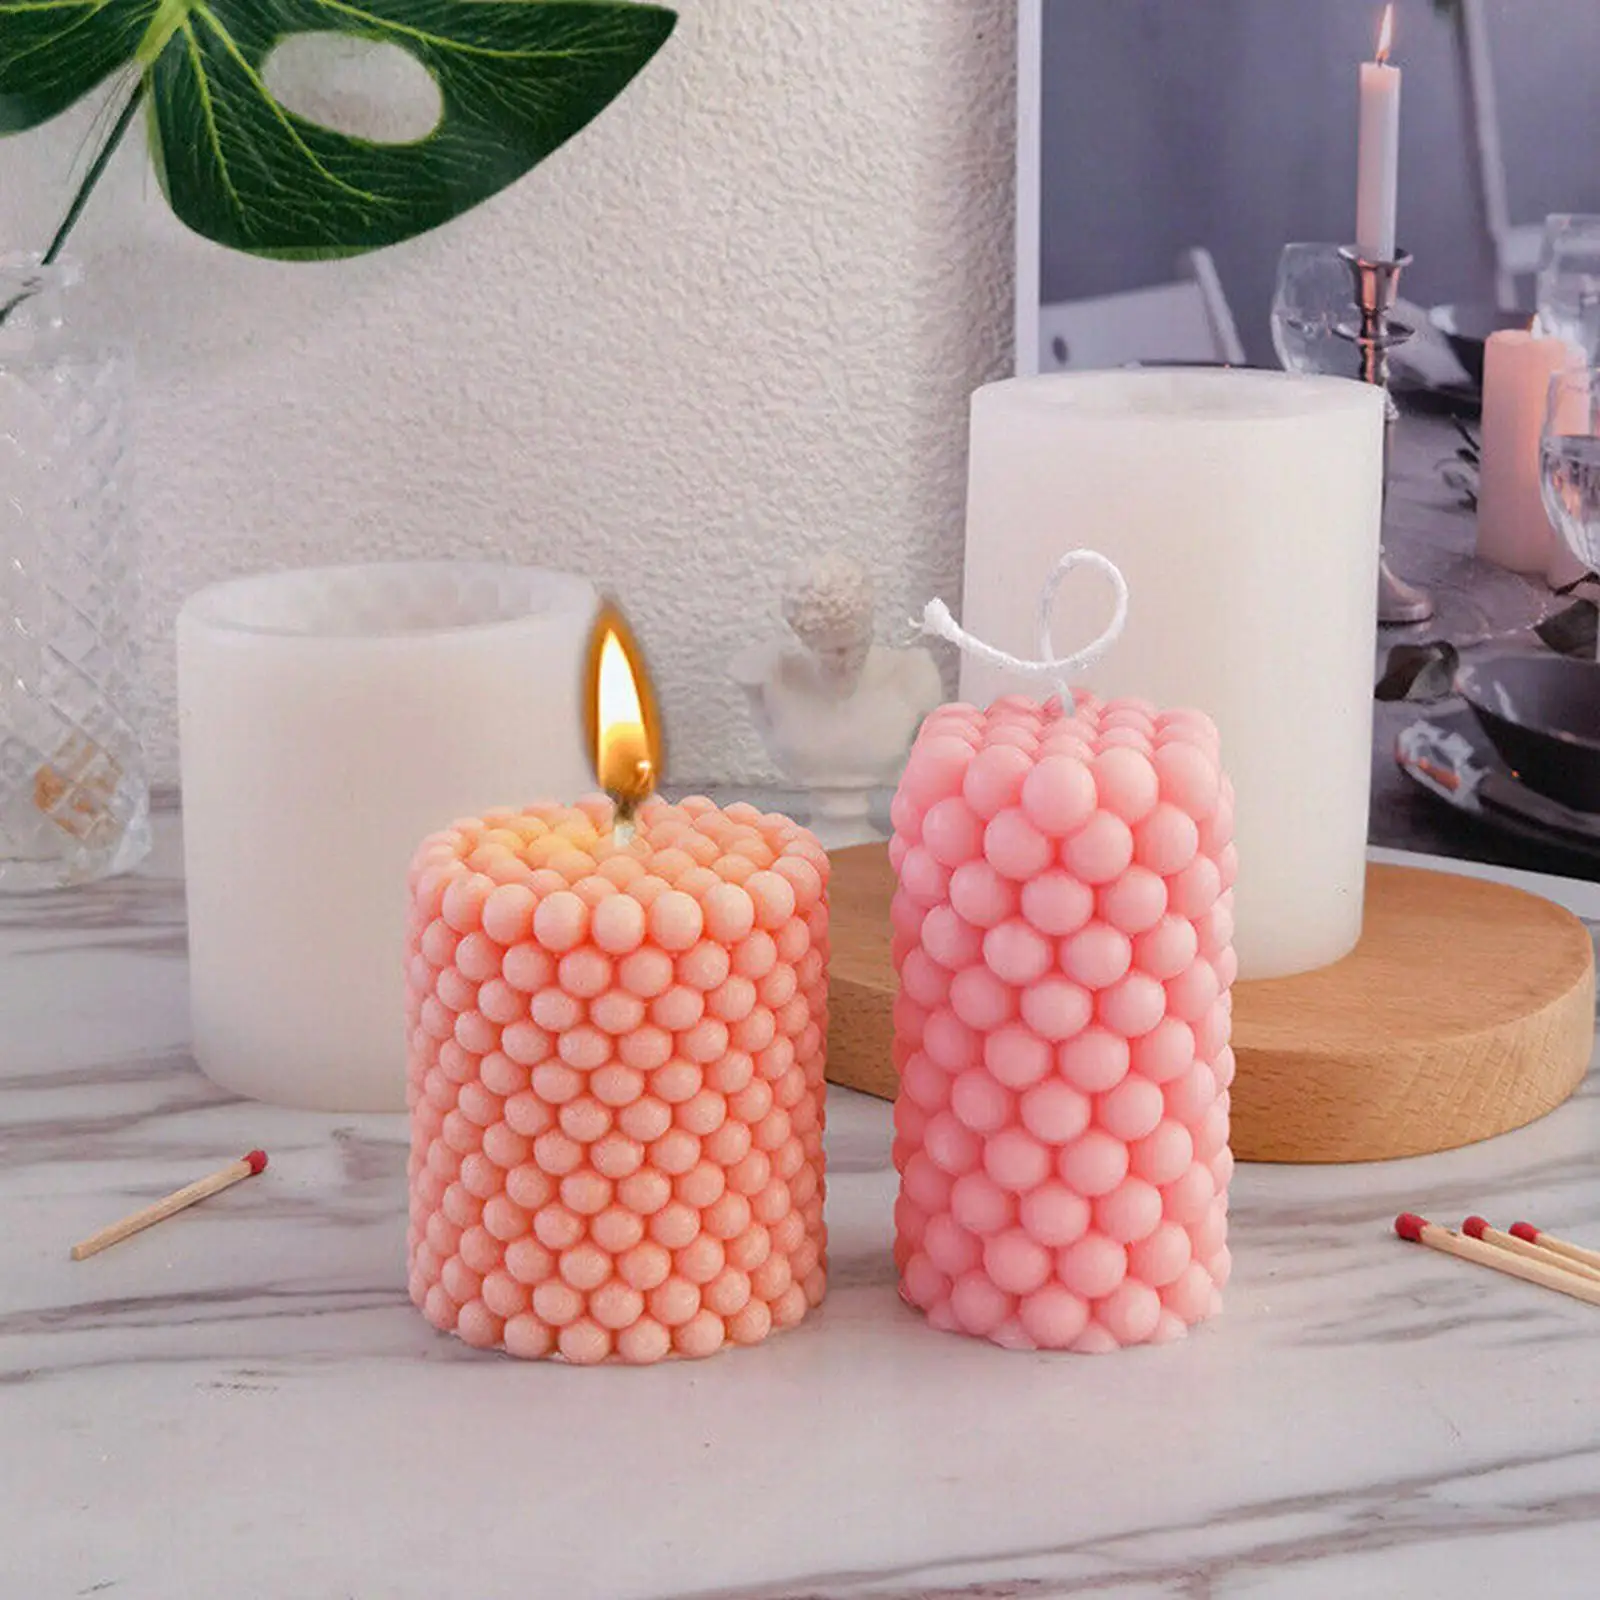 

Silicone Candle Mold Bubble Geometric Pillar Scented Chocolate Kit Craft Candles Tools Mould Making Cake DIY Handmade Makin E9O4